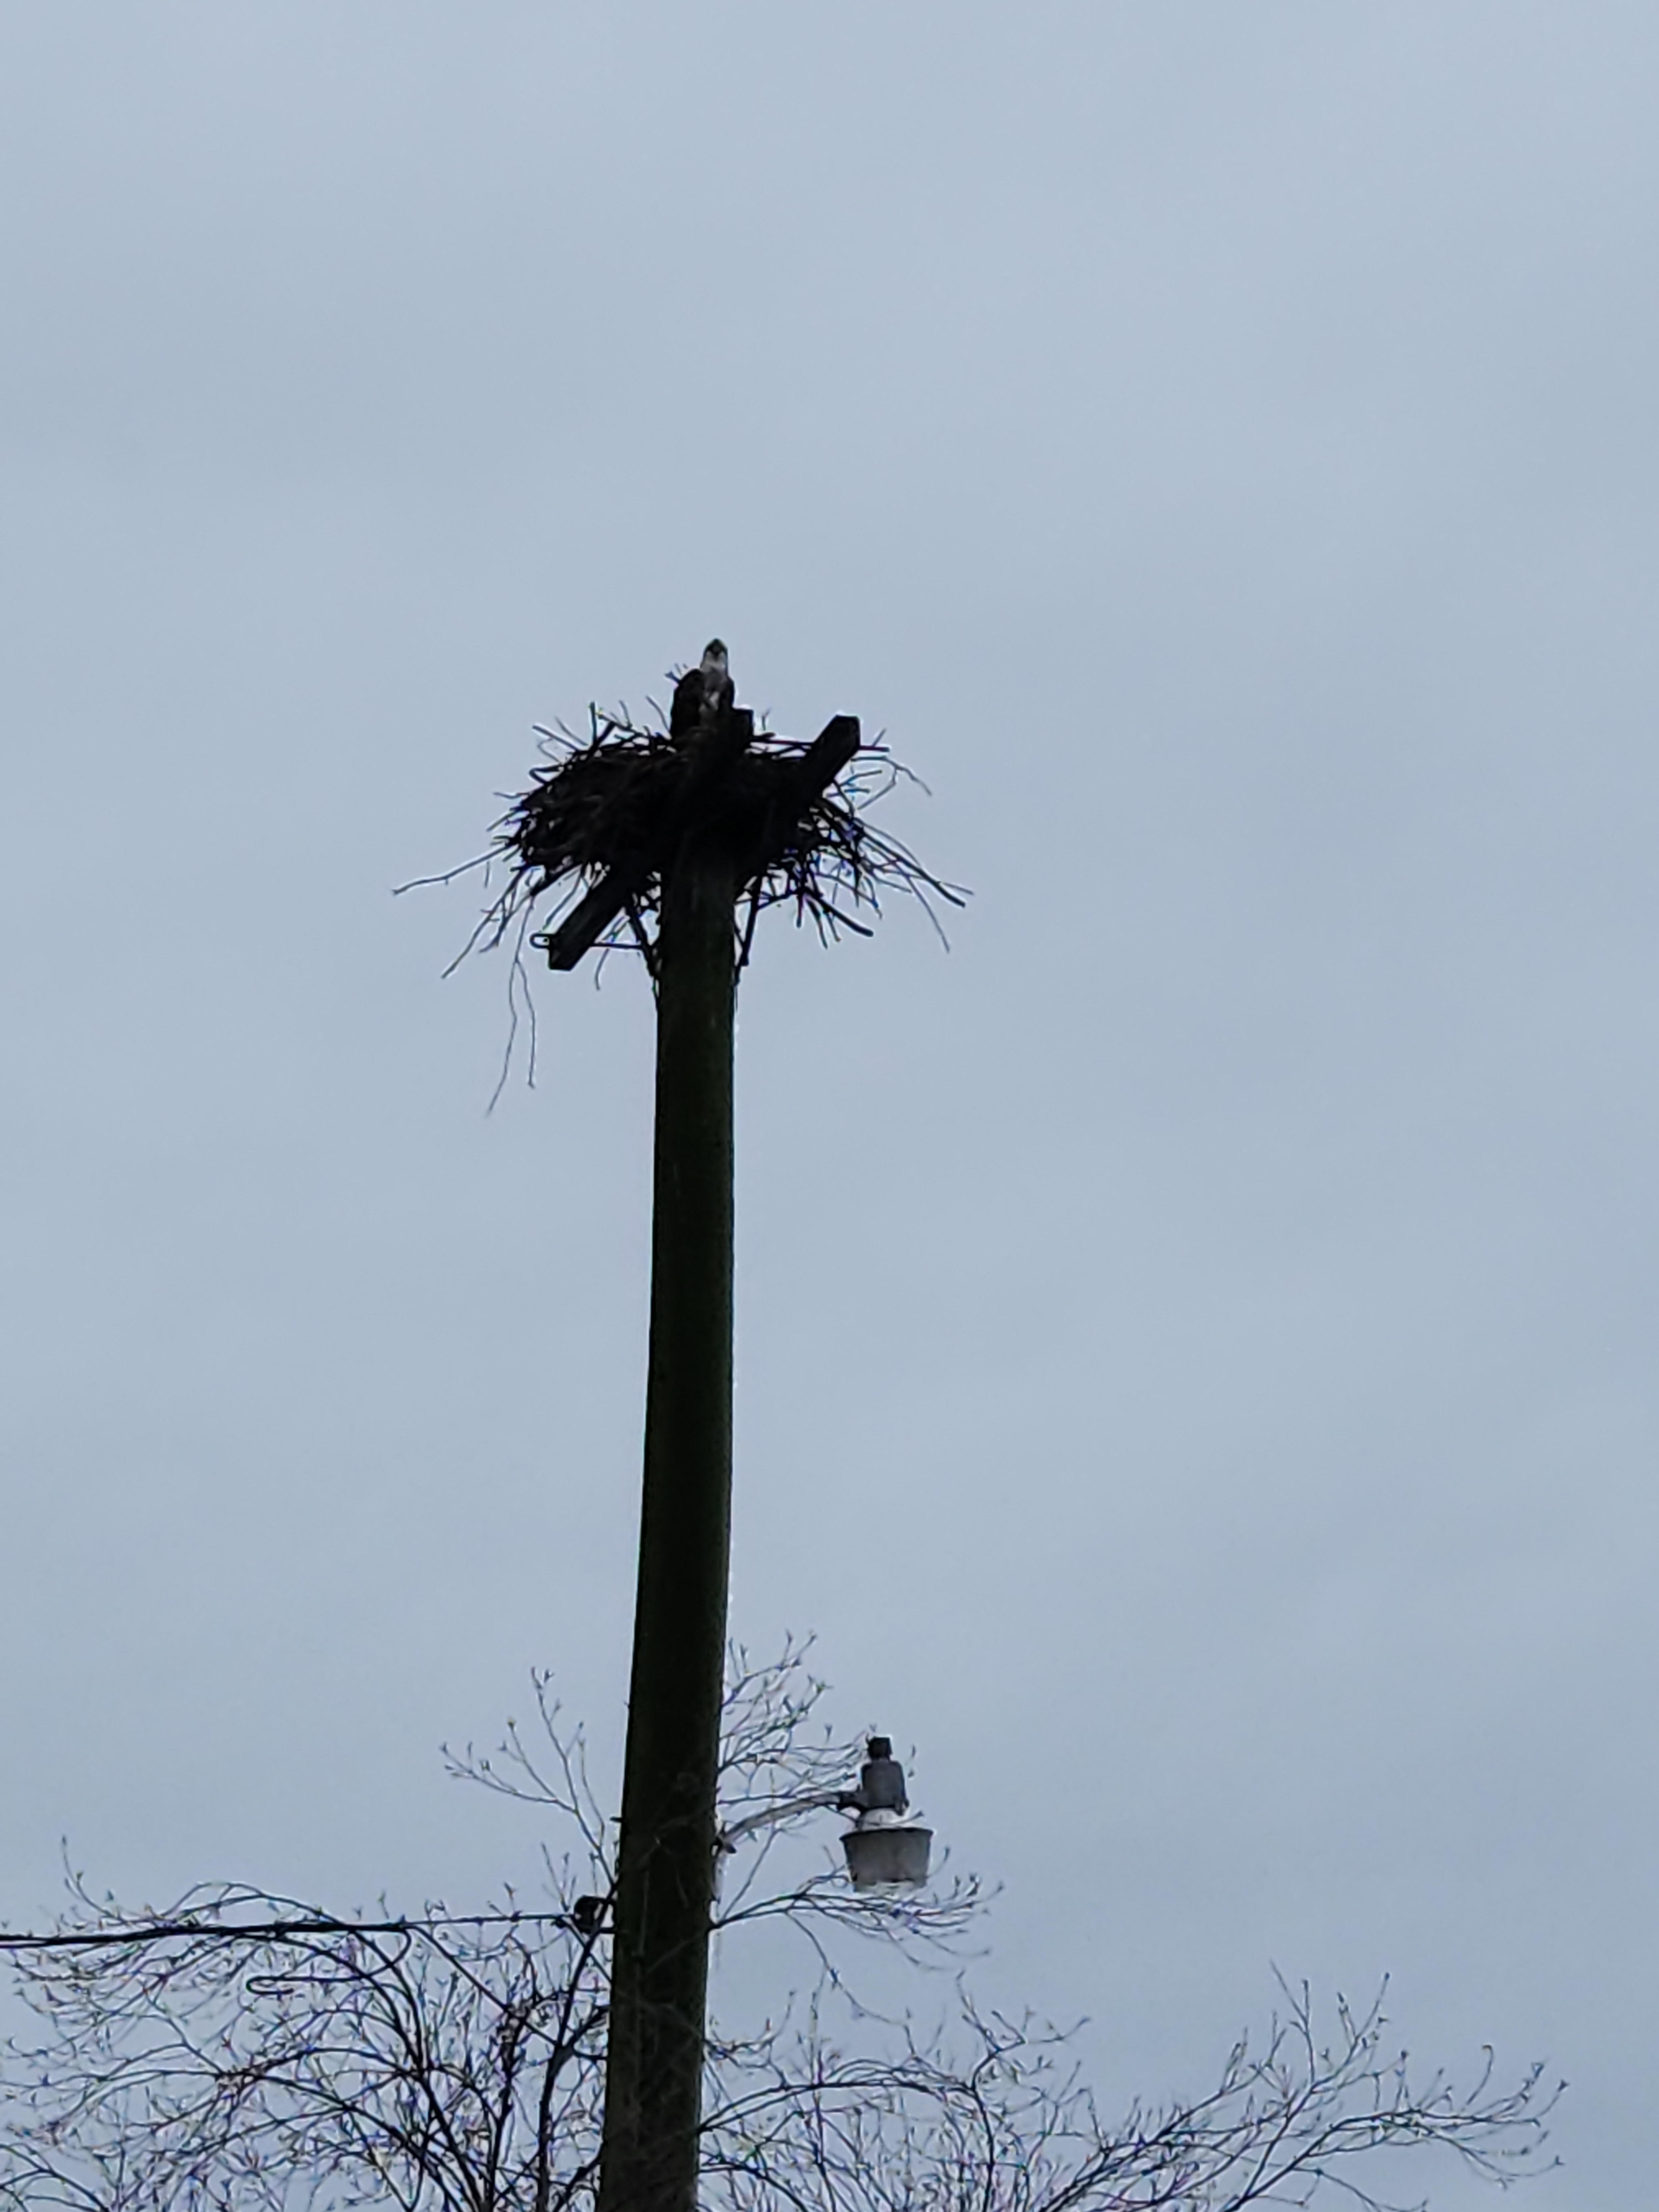 Osprey building her nest in early spring